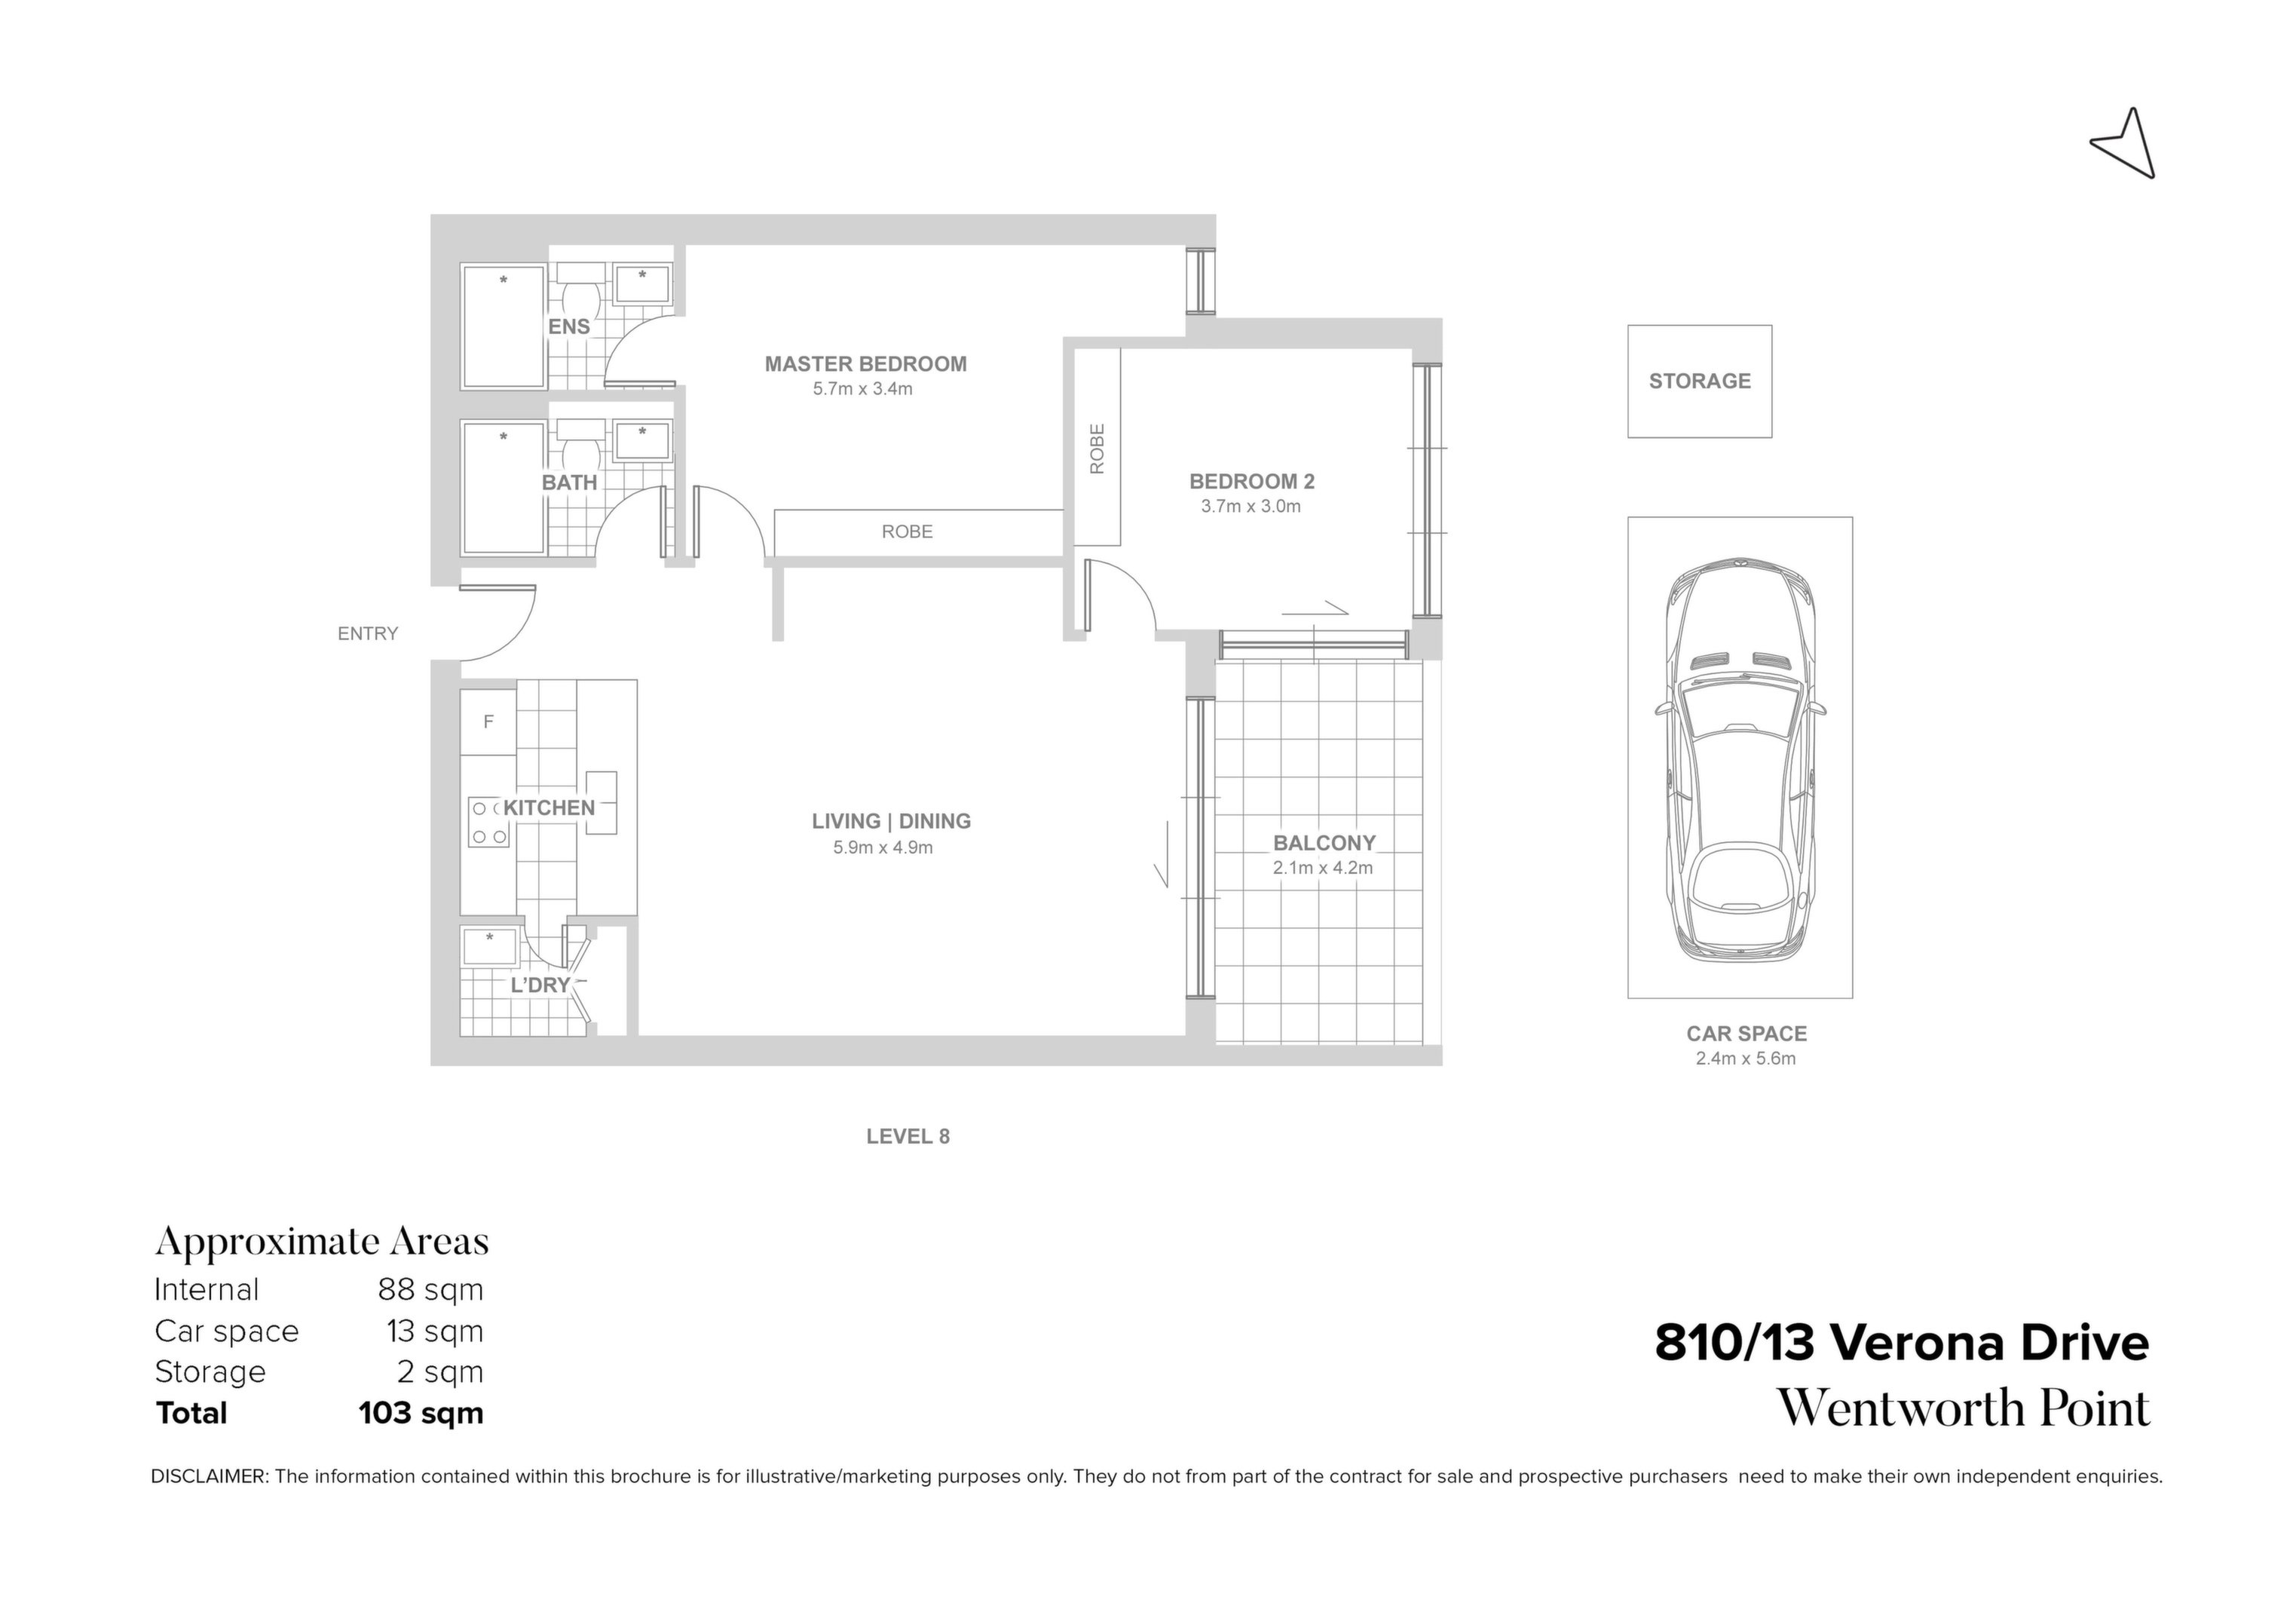 810/13 Verona Drive, Wentworth Point Sold by Chidiac Realty - floorplan